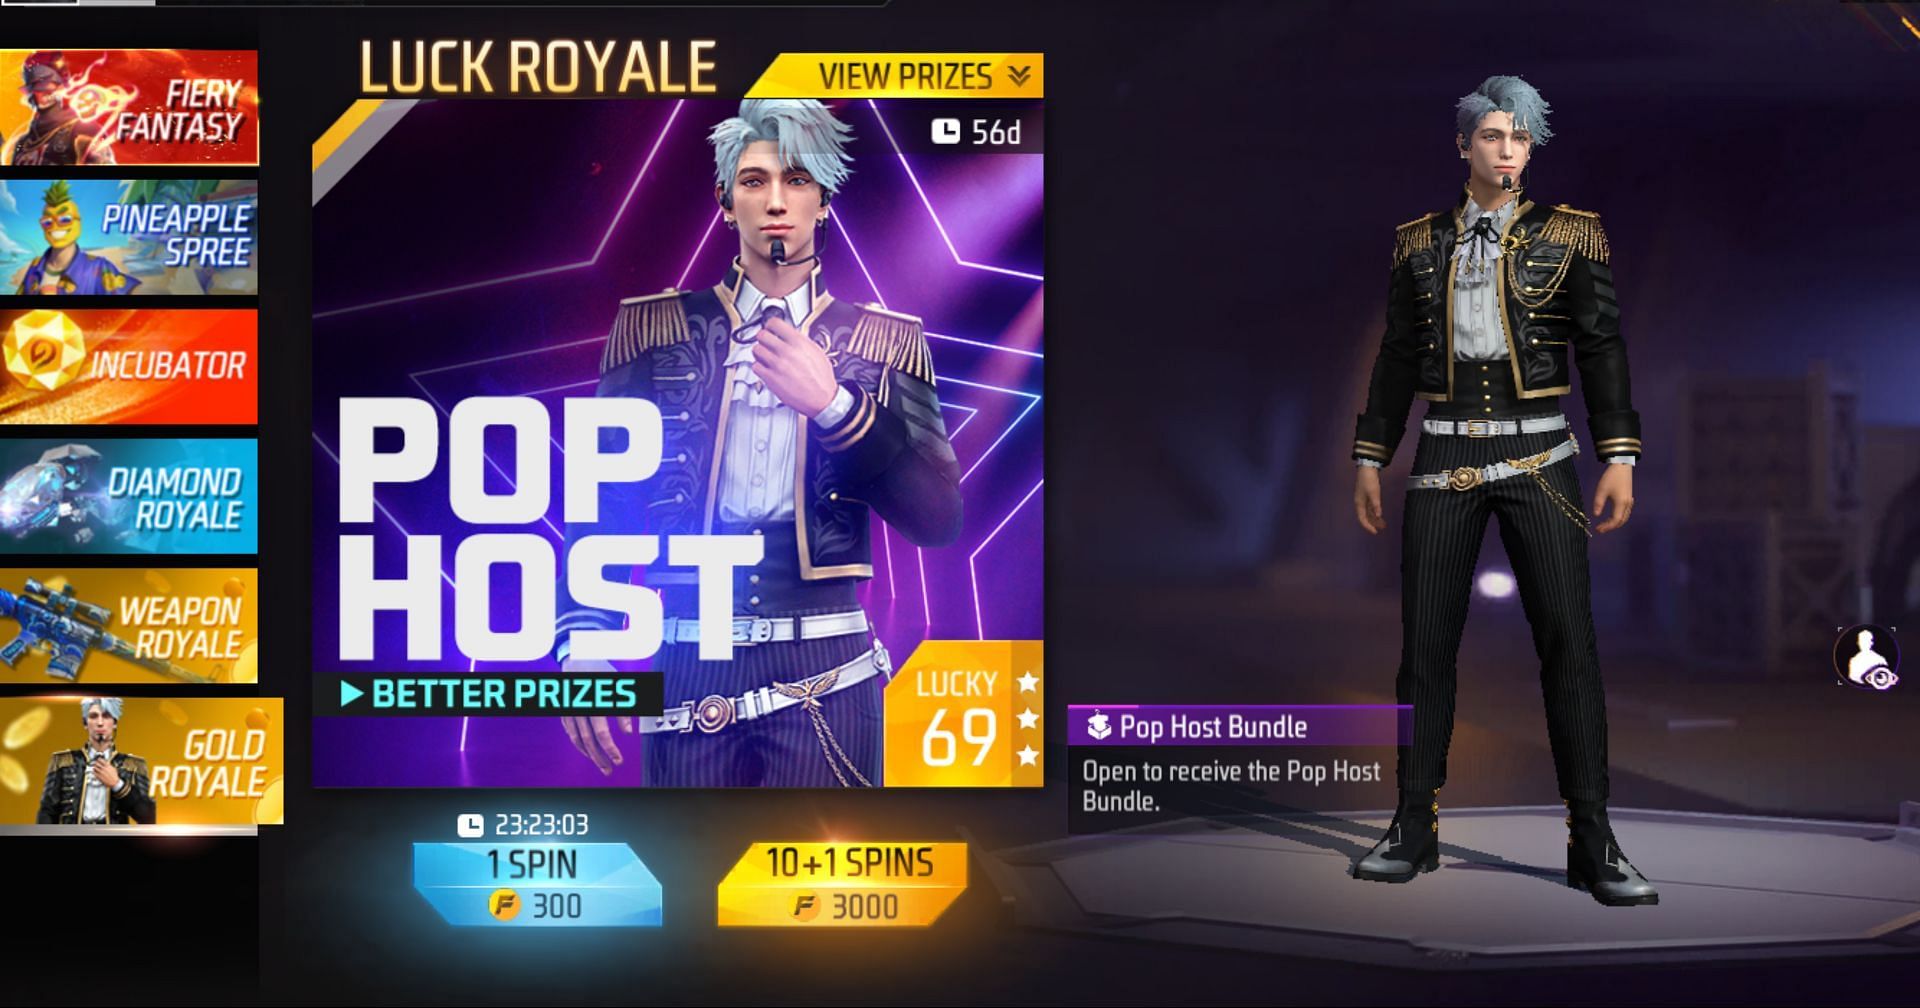 Try spinning using gold to receive the Pop Host bundle in Free Fire MAX (Image via Garena)